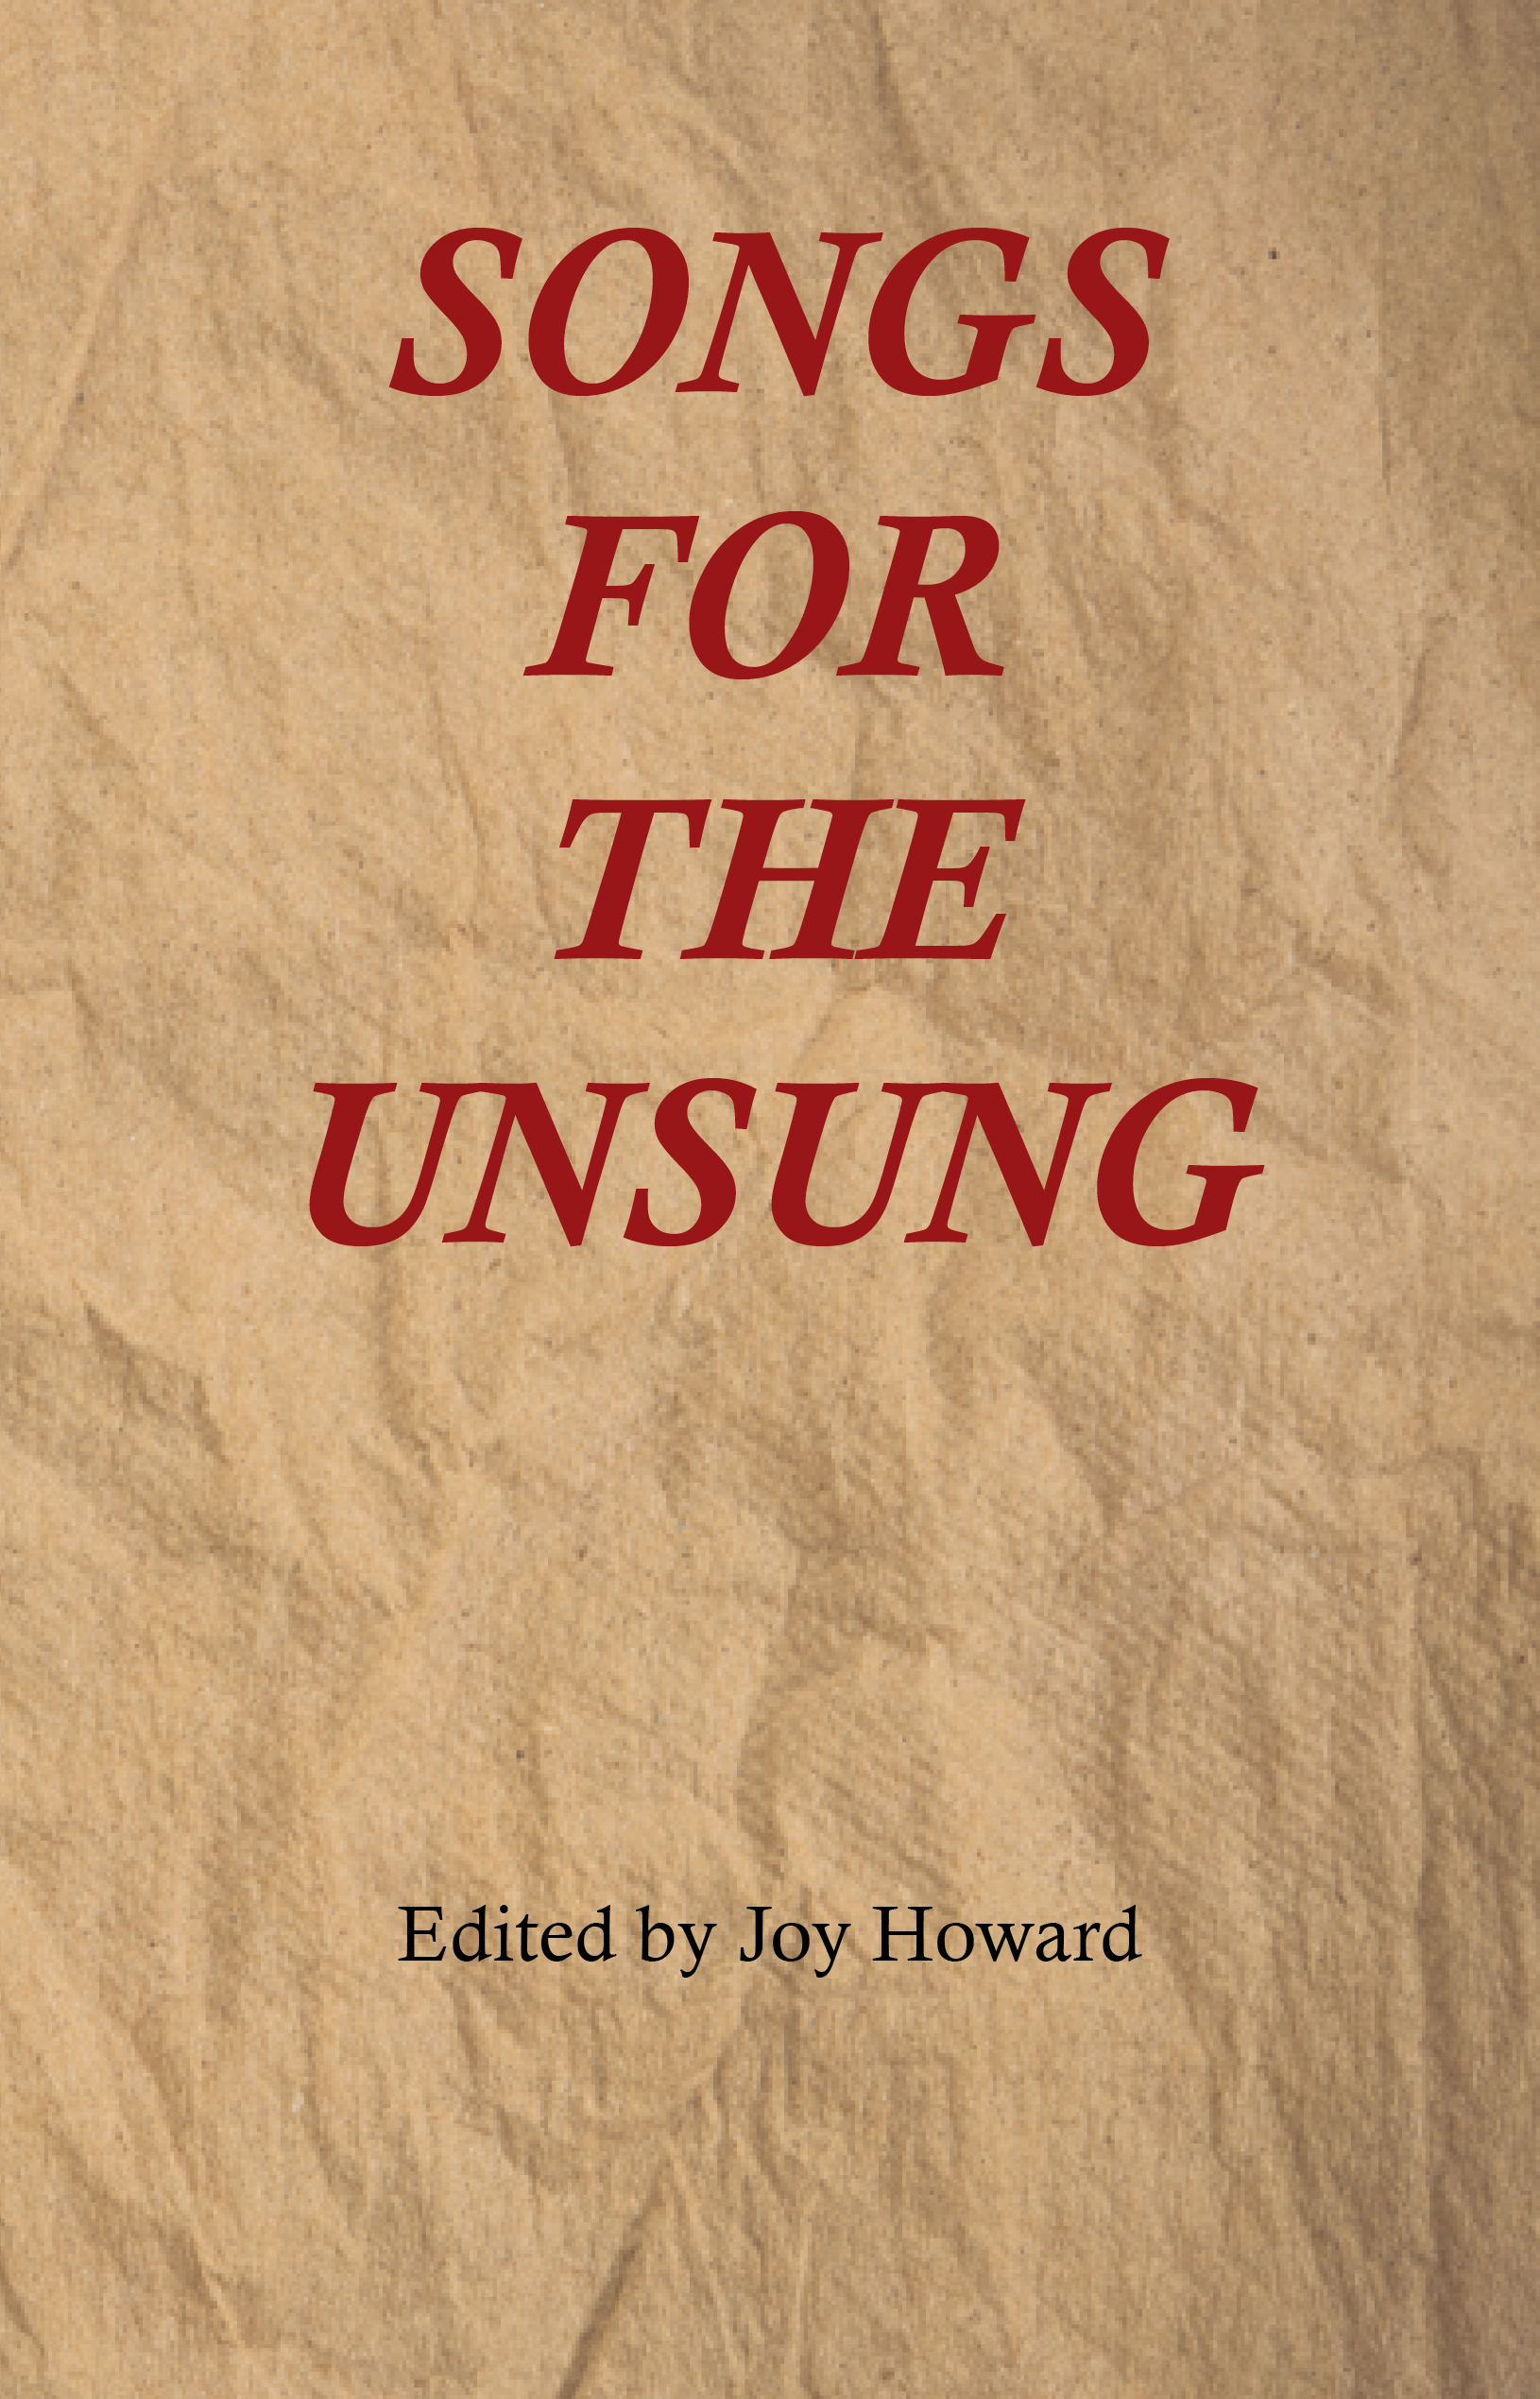 Songs for the Unsung